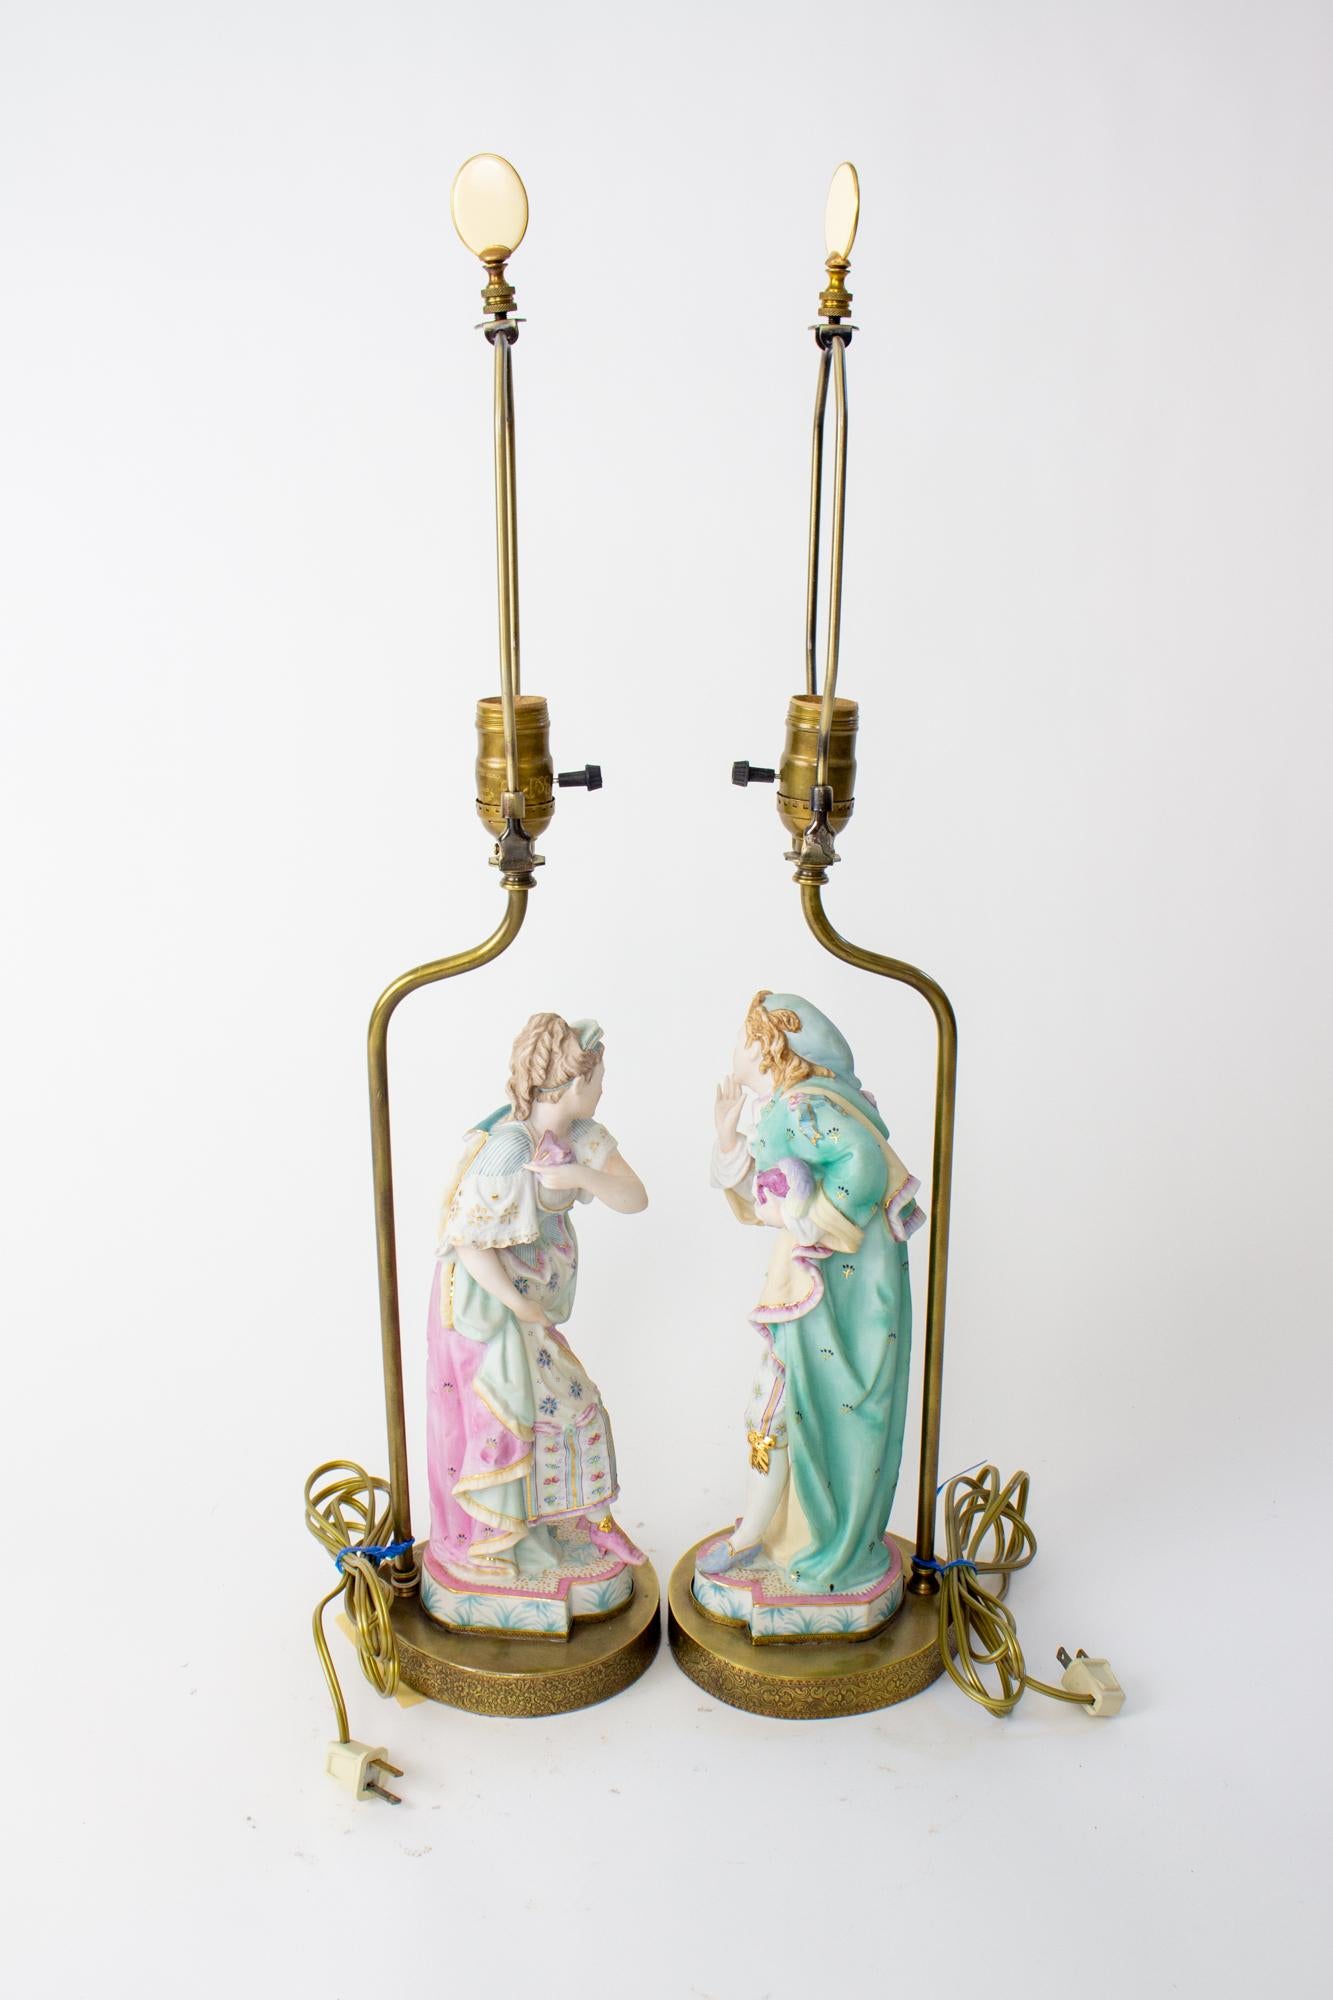 Baroque Revival Mid 20th Century Masquerade Bisque Figurine Lamps - a Pair For Sale